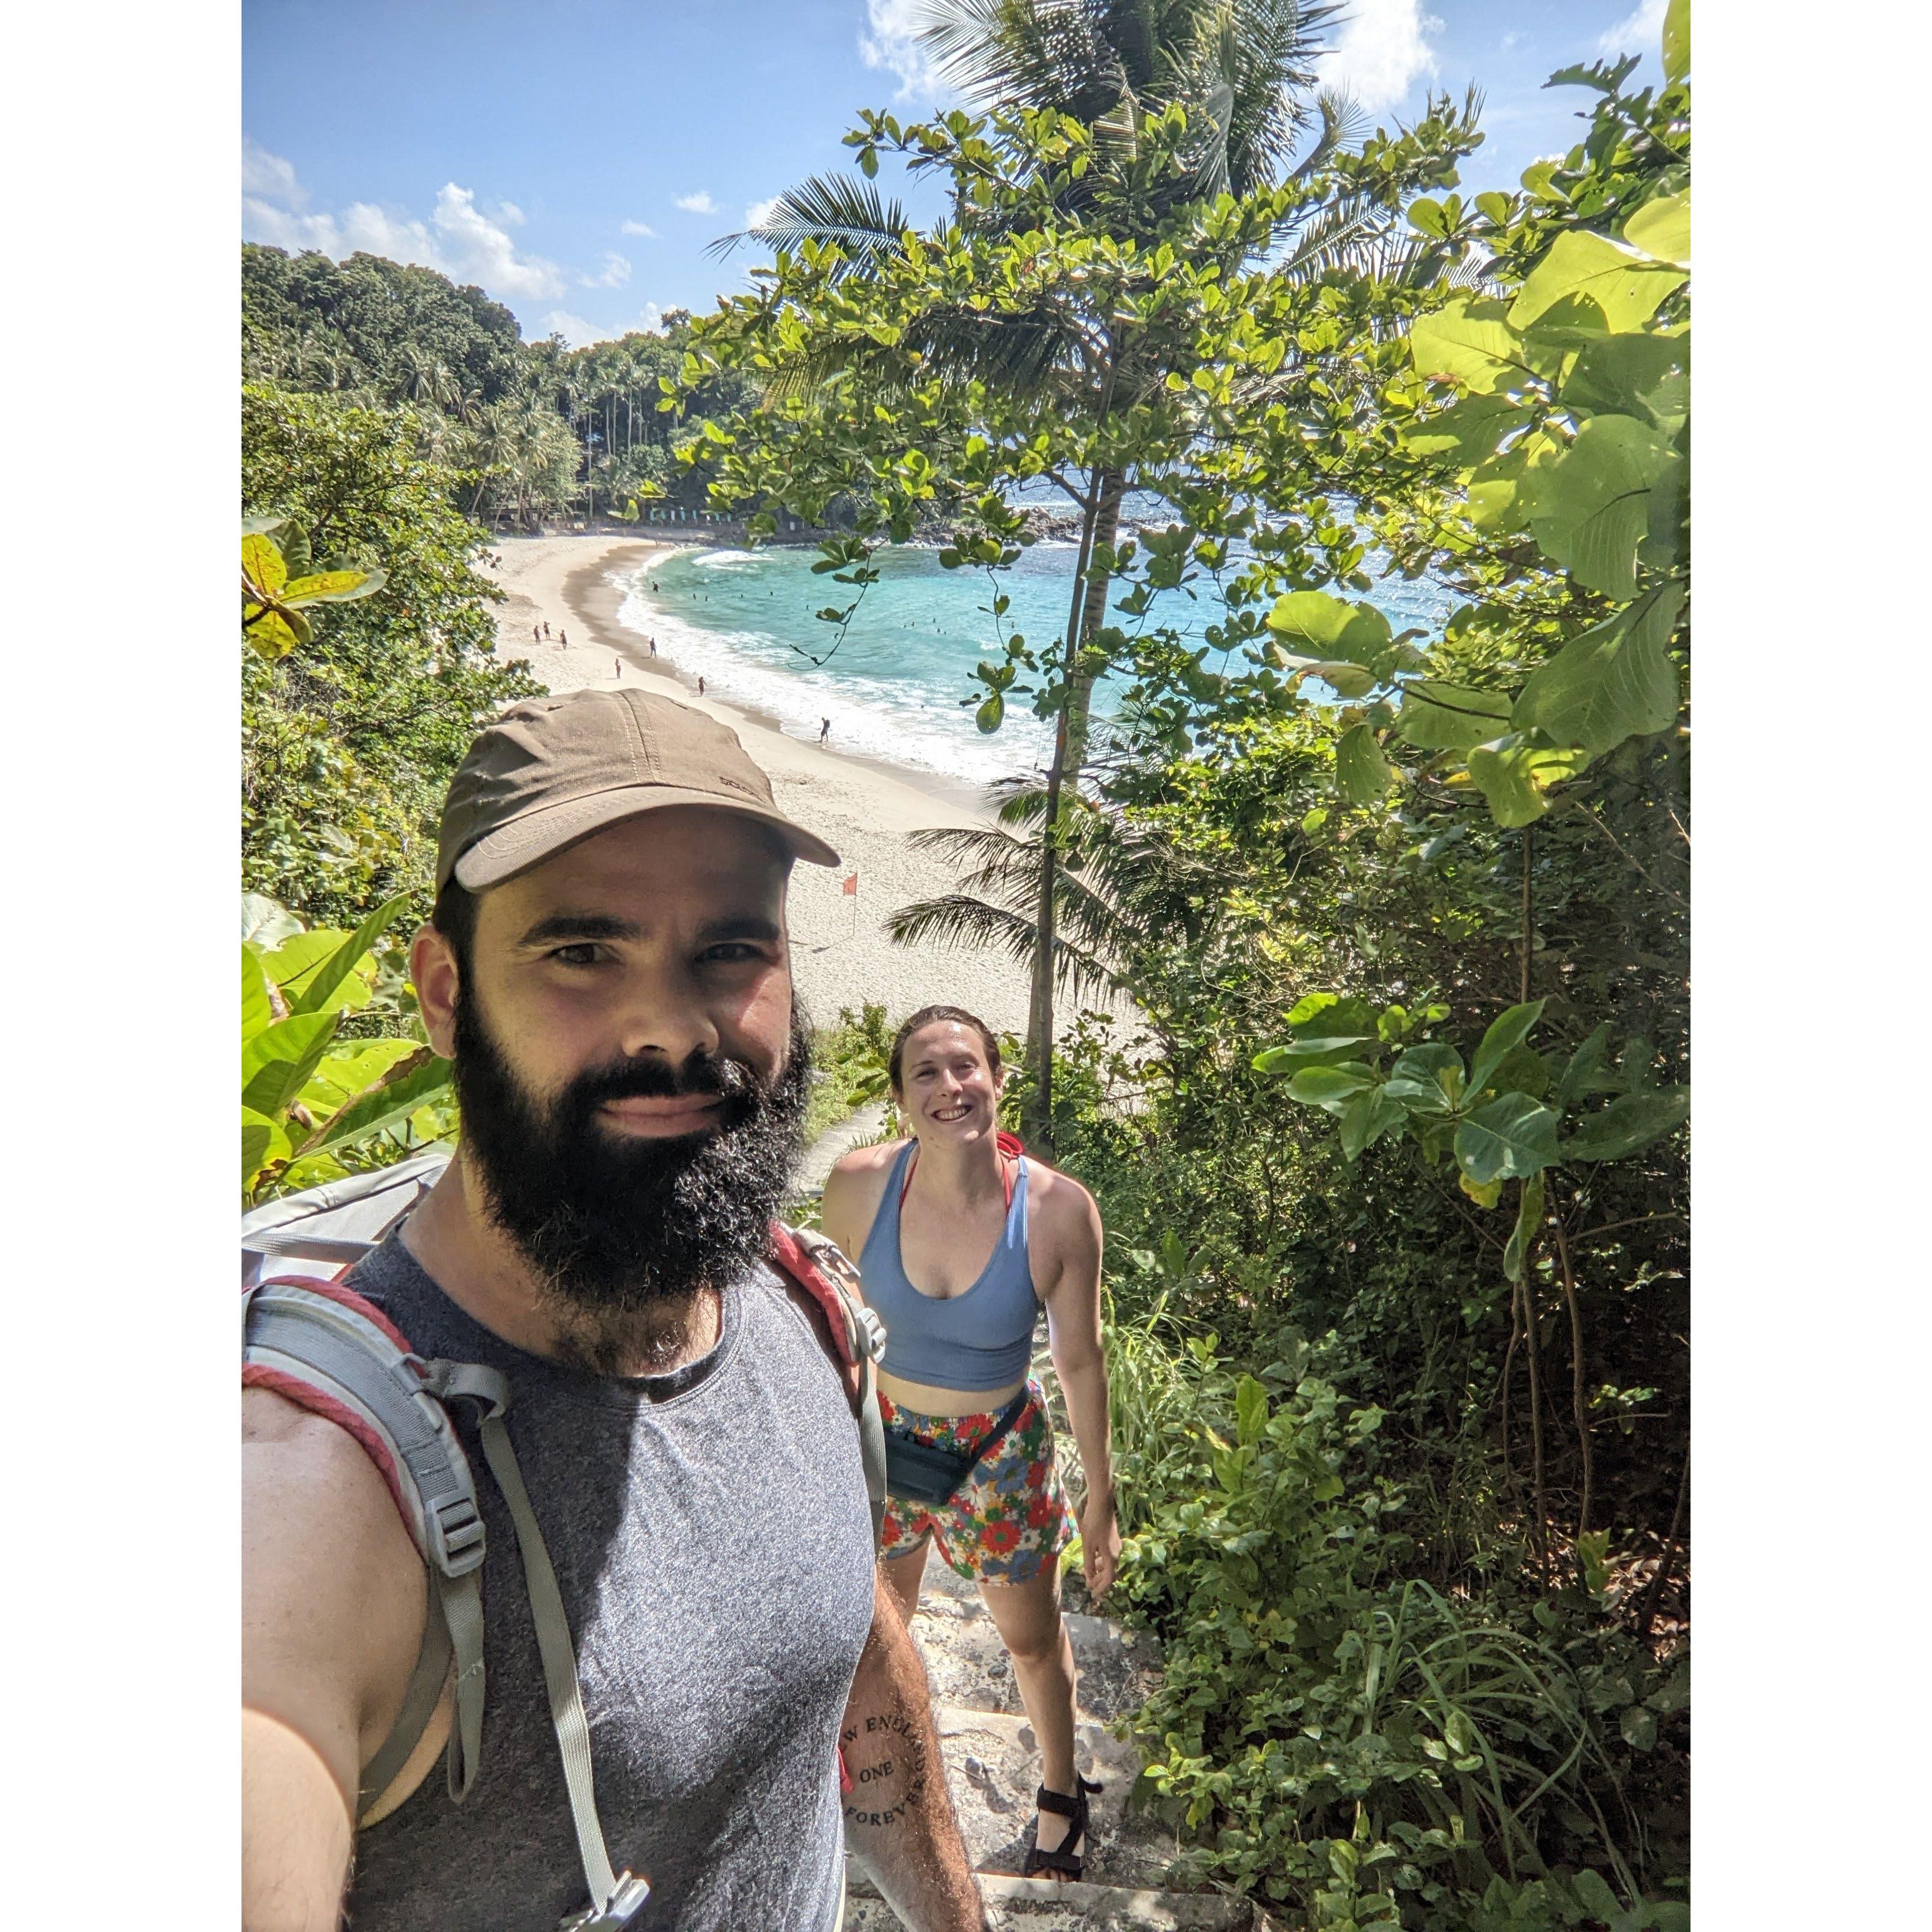 Hiking down to a secluded beach in Thailand